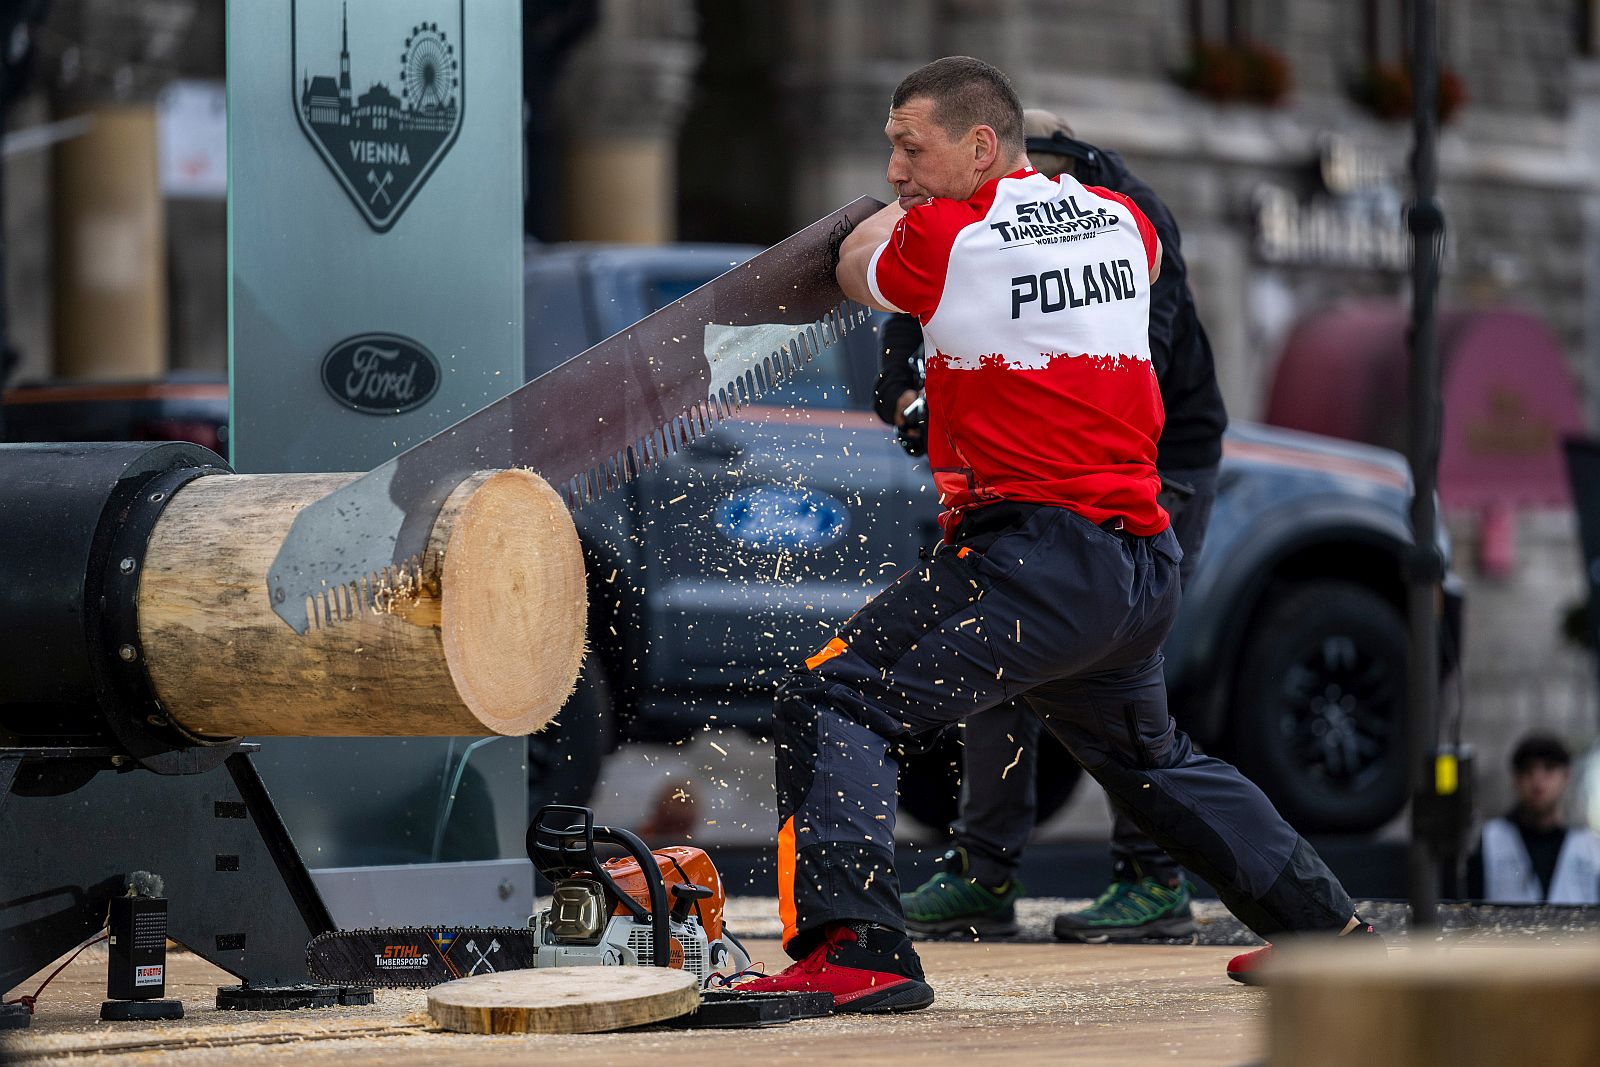 Marcin Darga of Poland performs during the STIHL TIMBERSPORTS® World Trophy 2022 in Vienna, Austria on May 28, 2022.